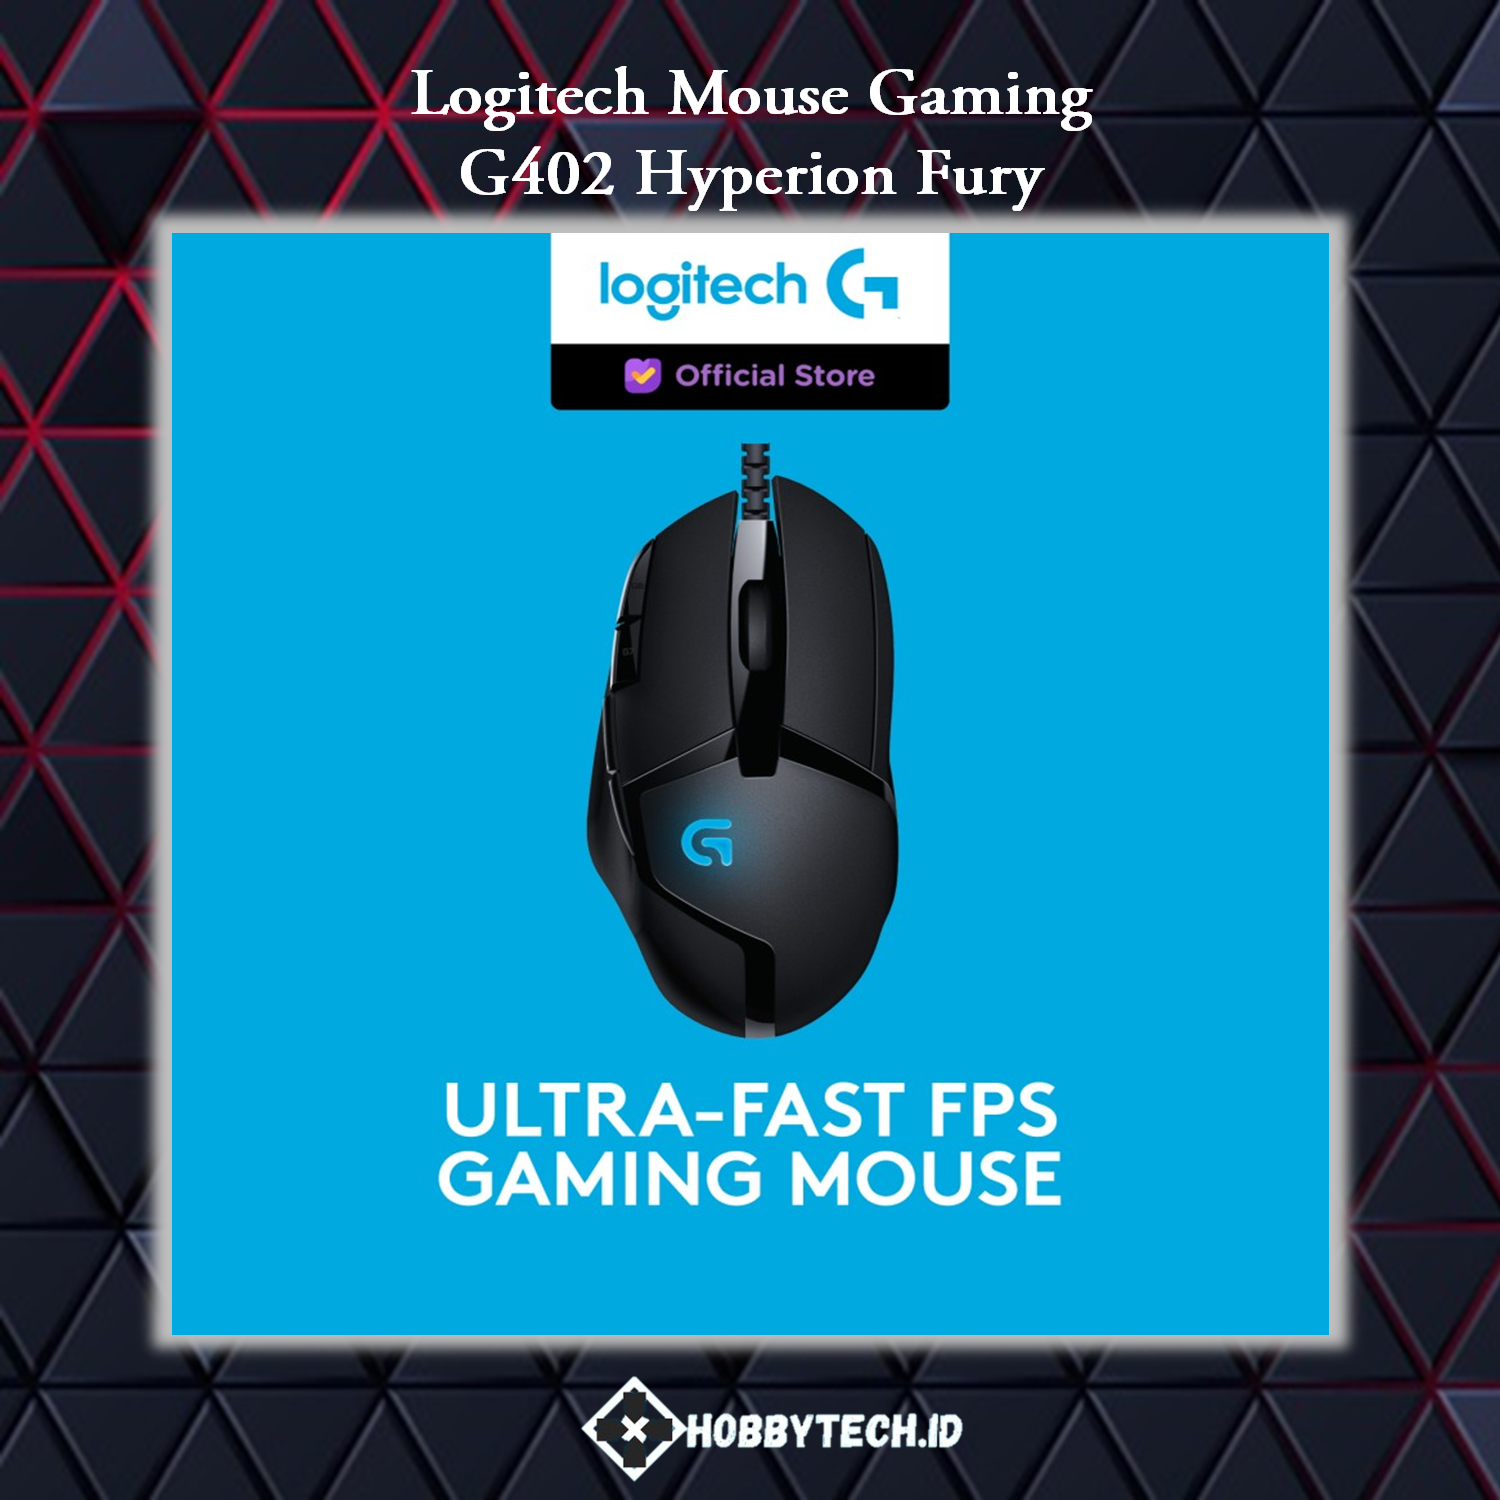 Logitech-G G402 Hyperion Fury FPS Gaming Mouse